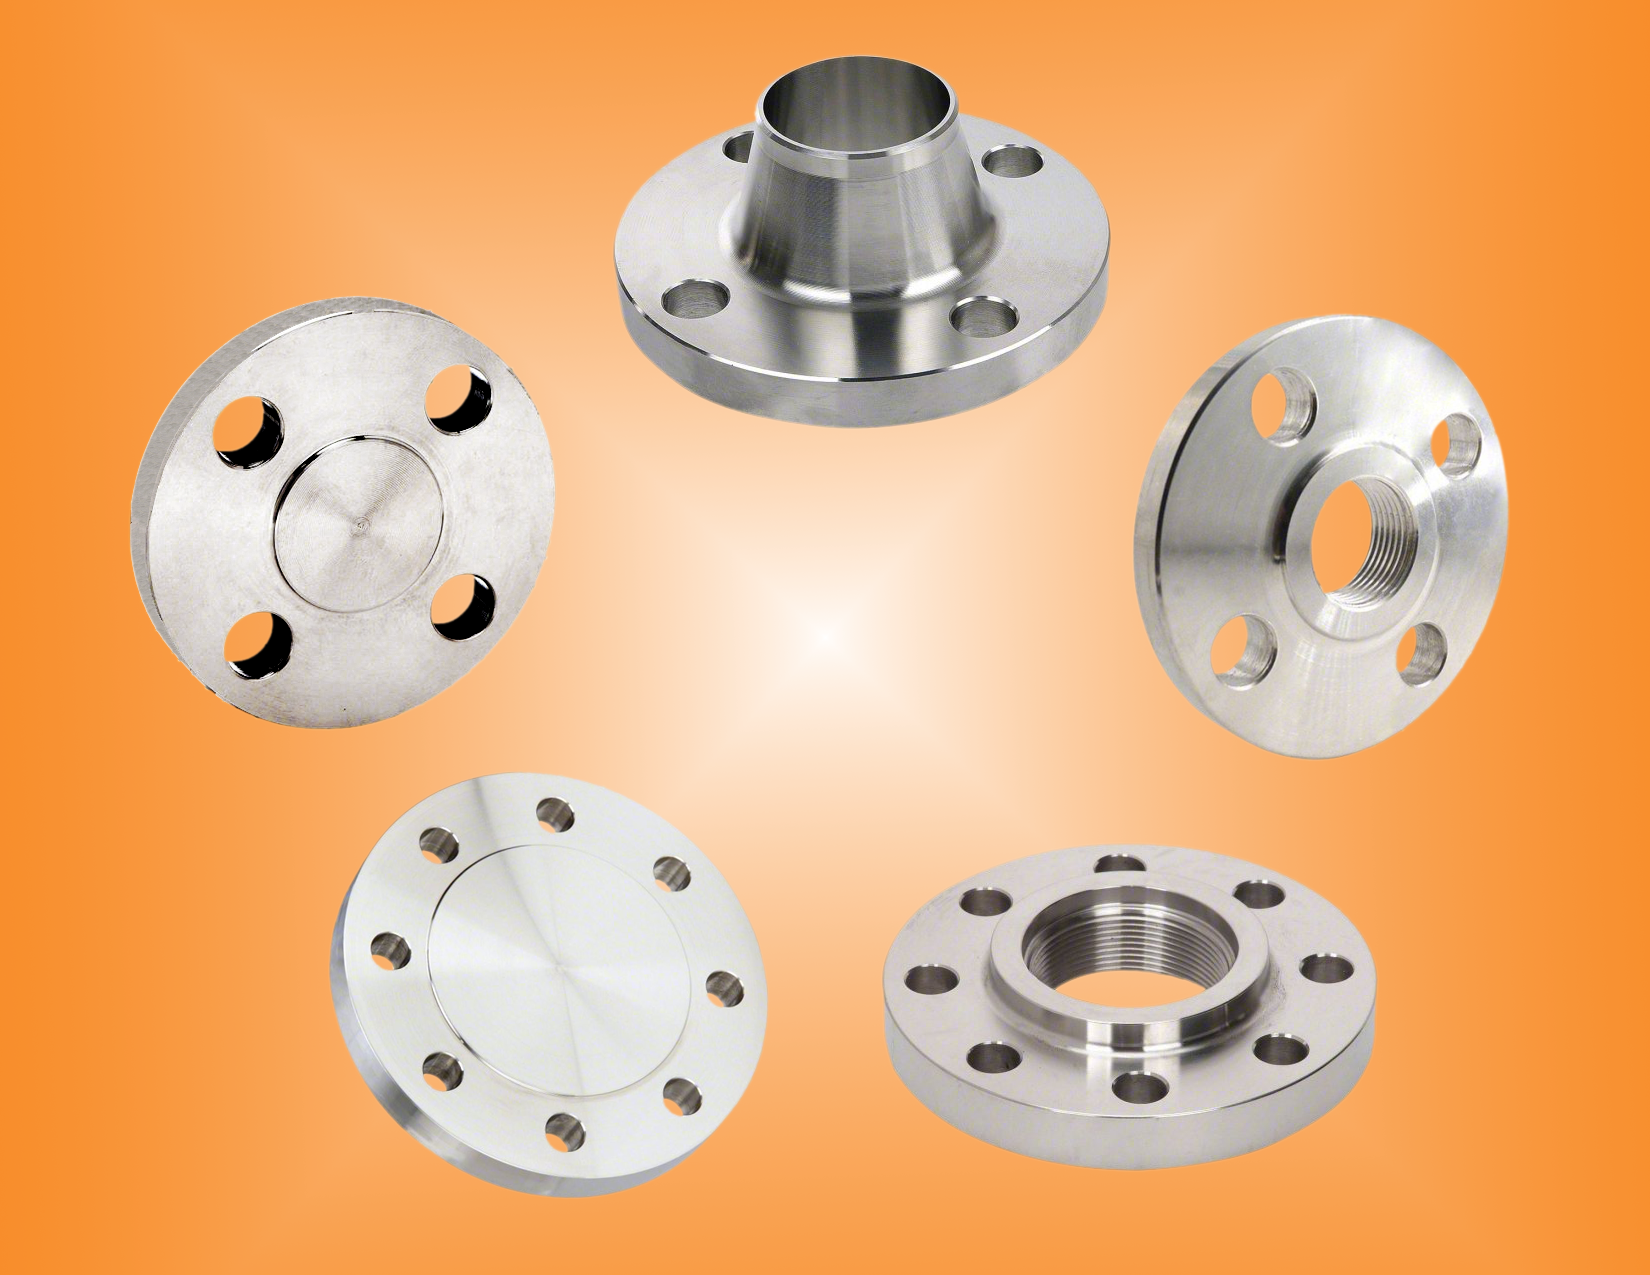 Flanges Product Images